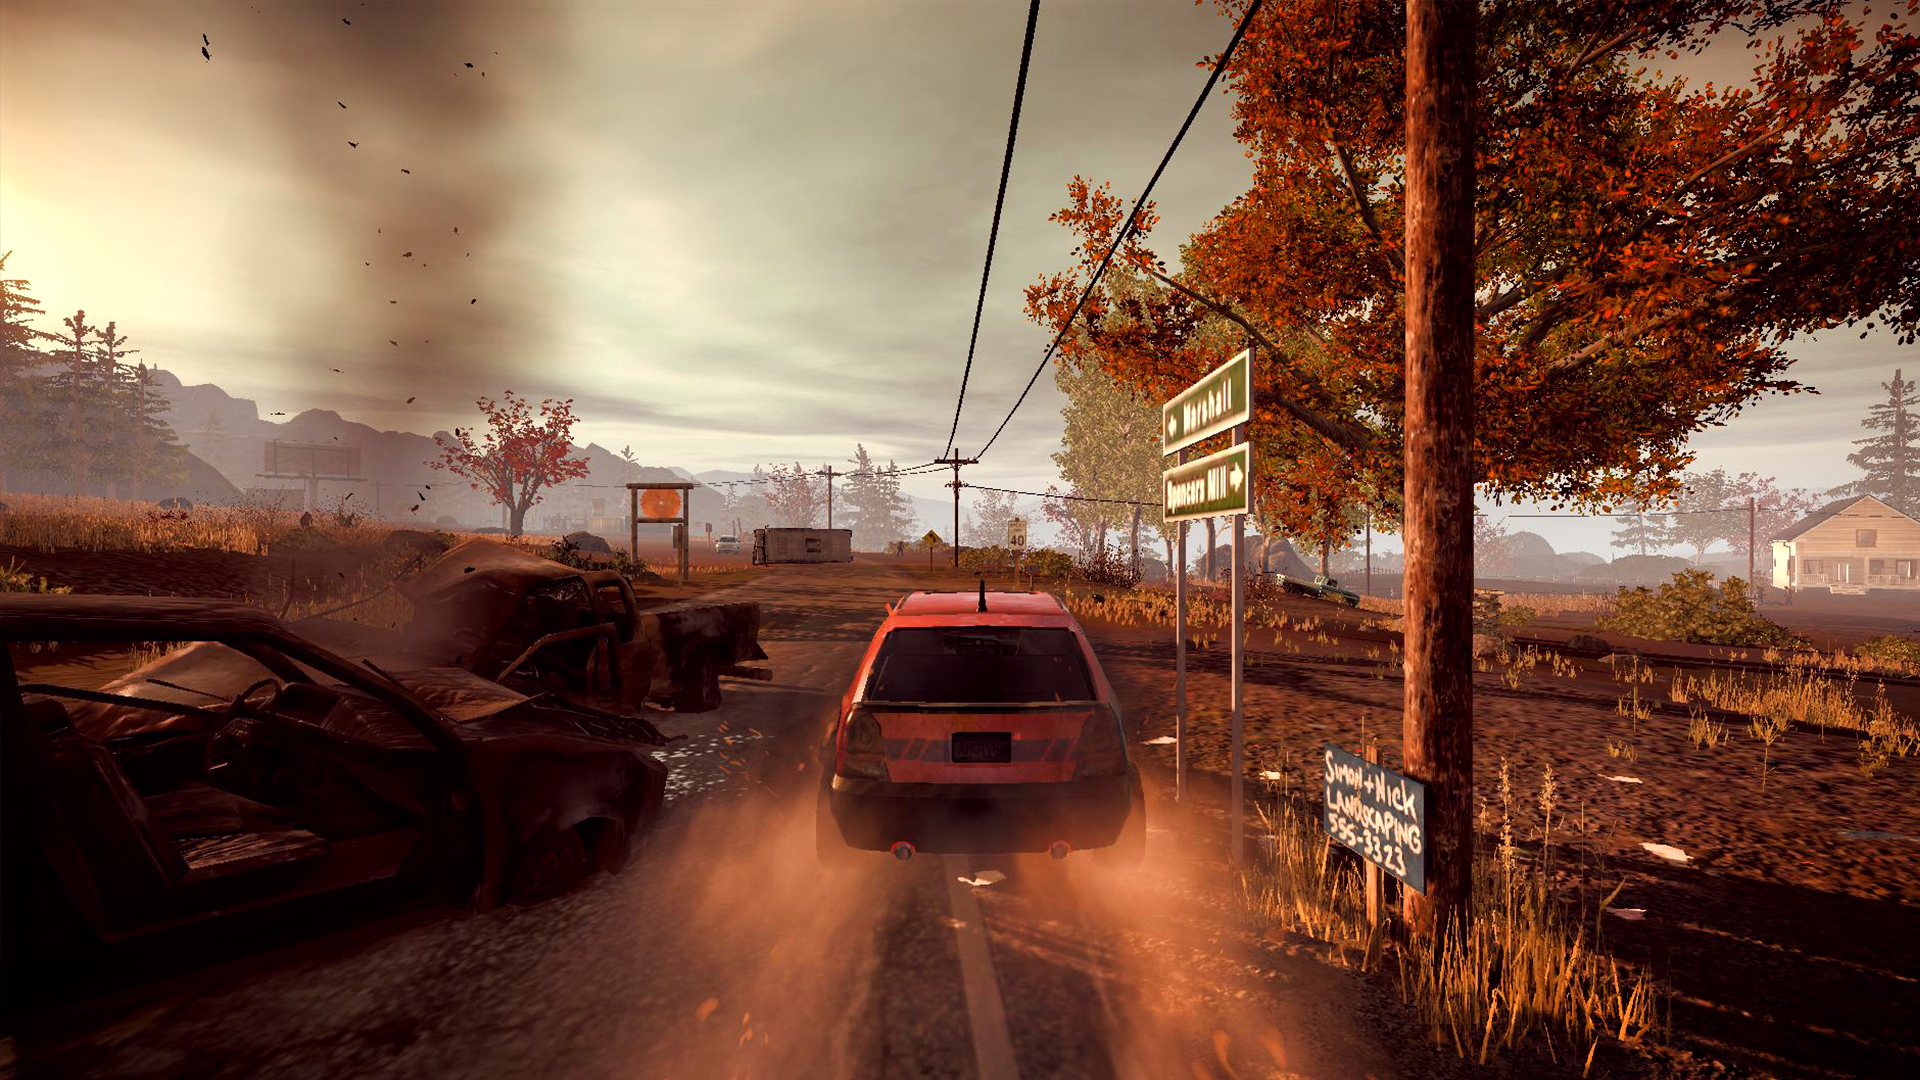 state of decay year one survival edition lifeline